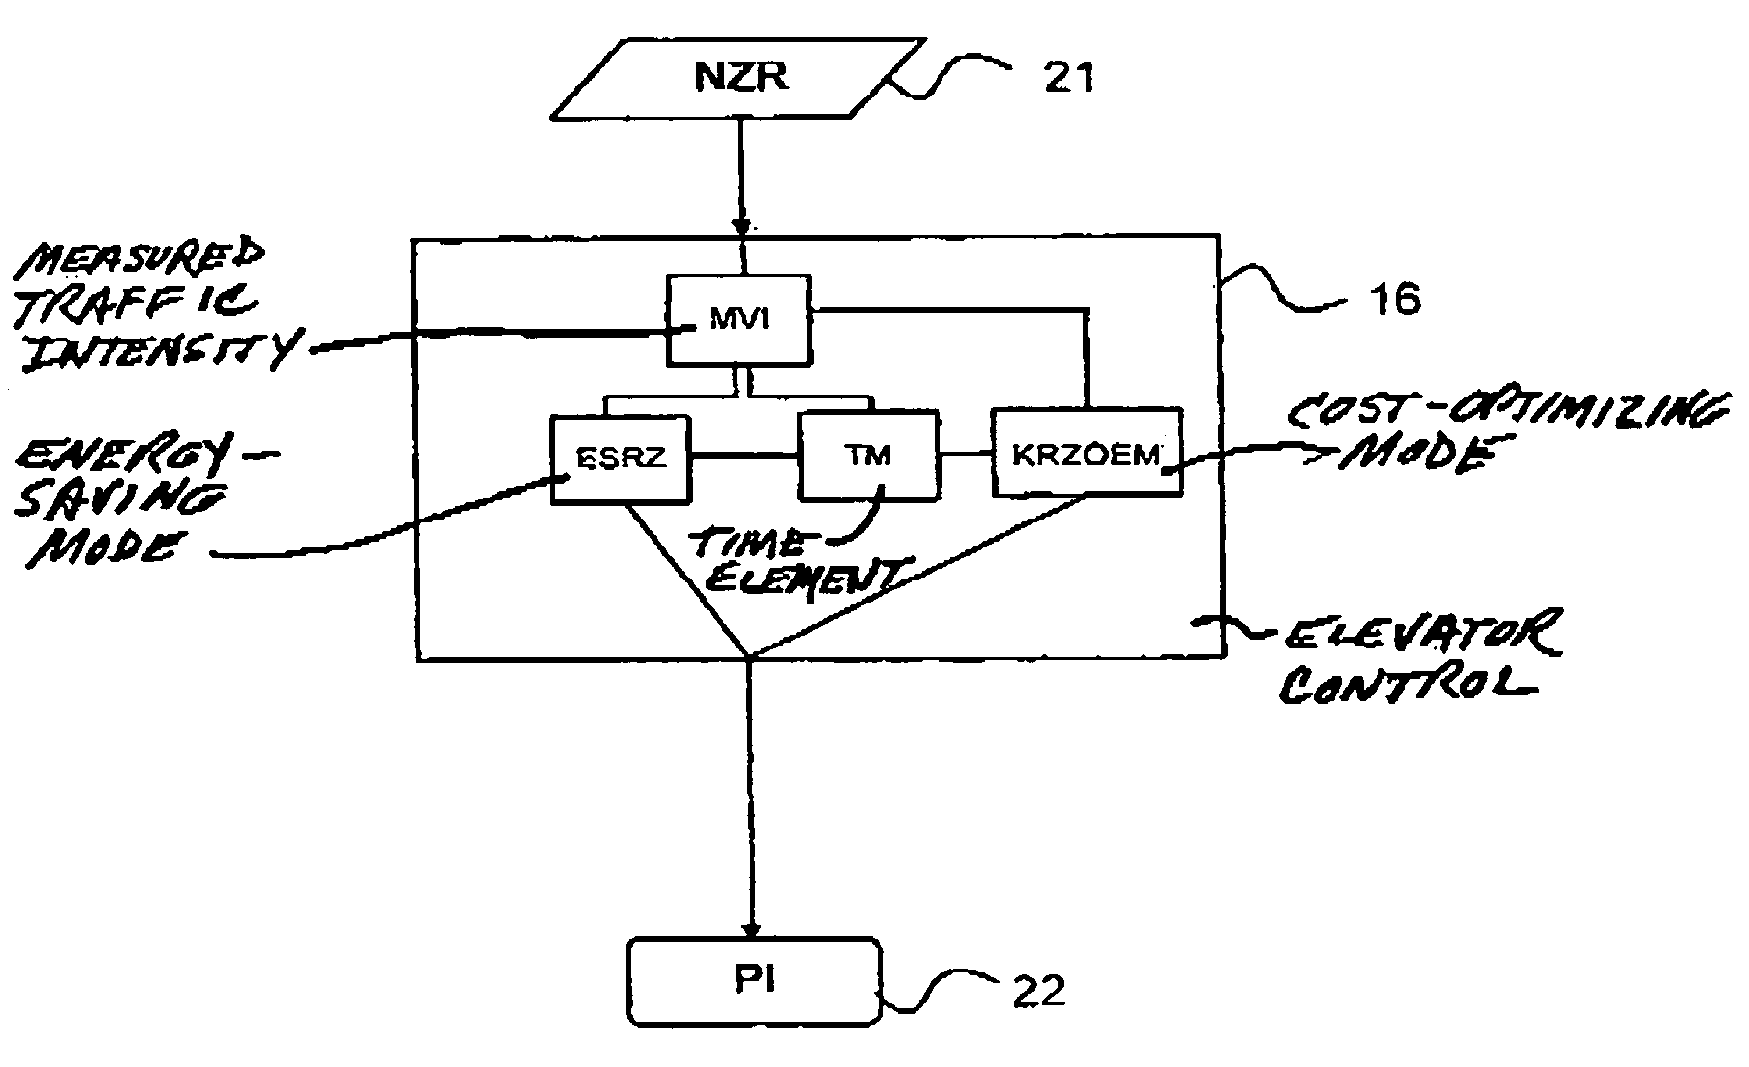 Method and apparatus for energy-saving elevator control